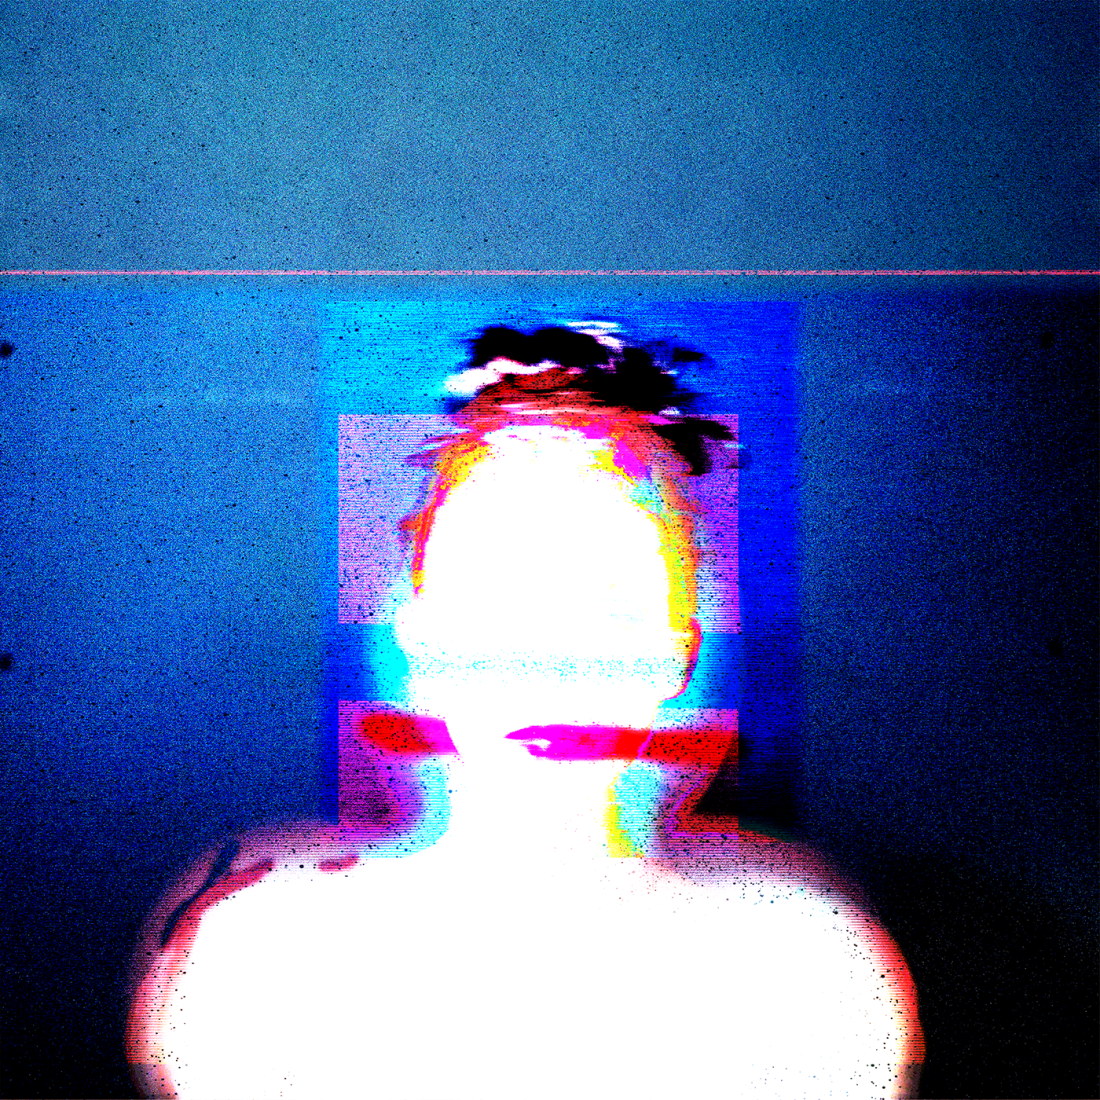 The silhouete of a woman, the background its blue and has a glitch effect. The silhouete is white and the face is a little blurred